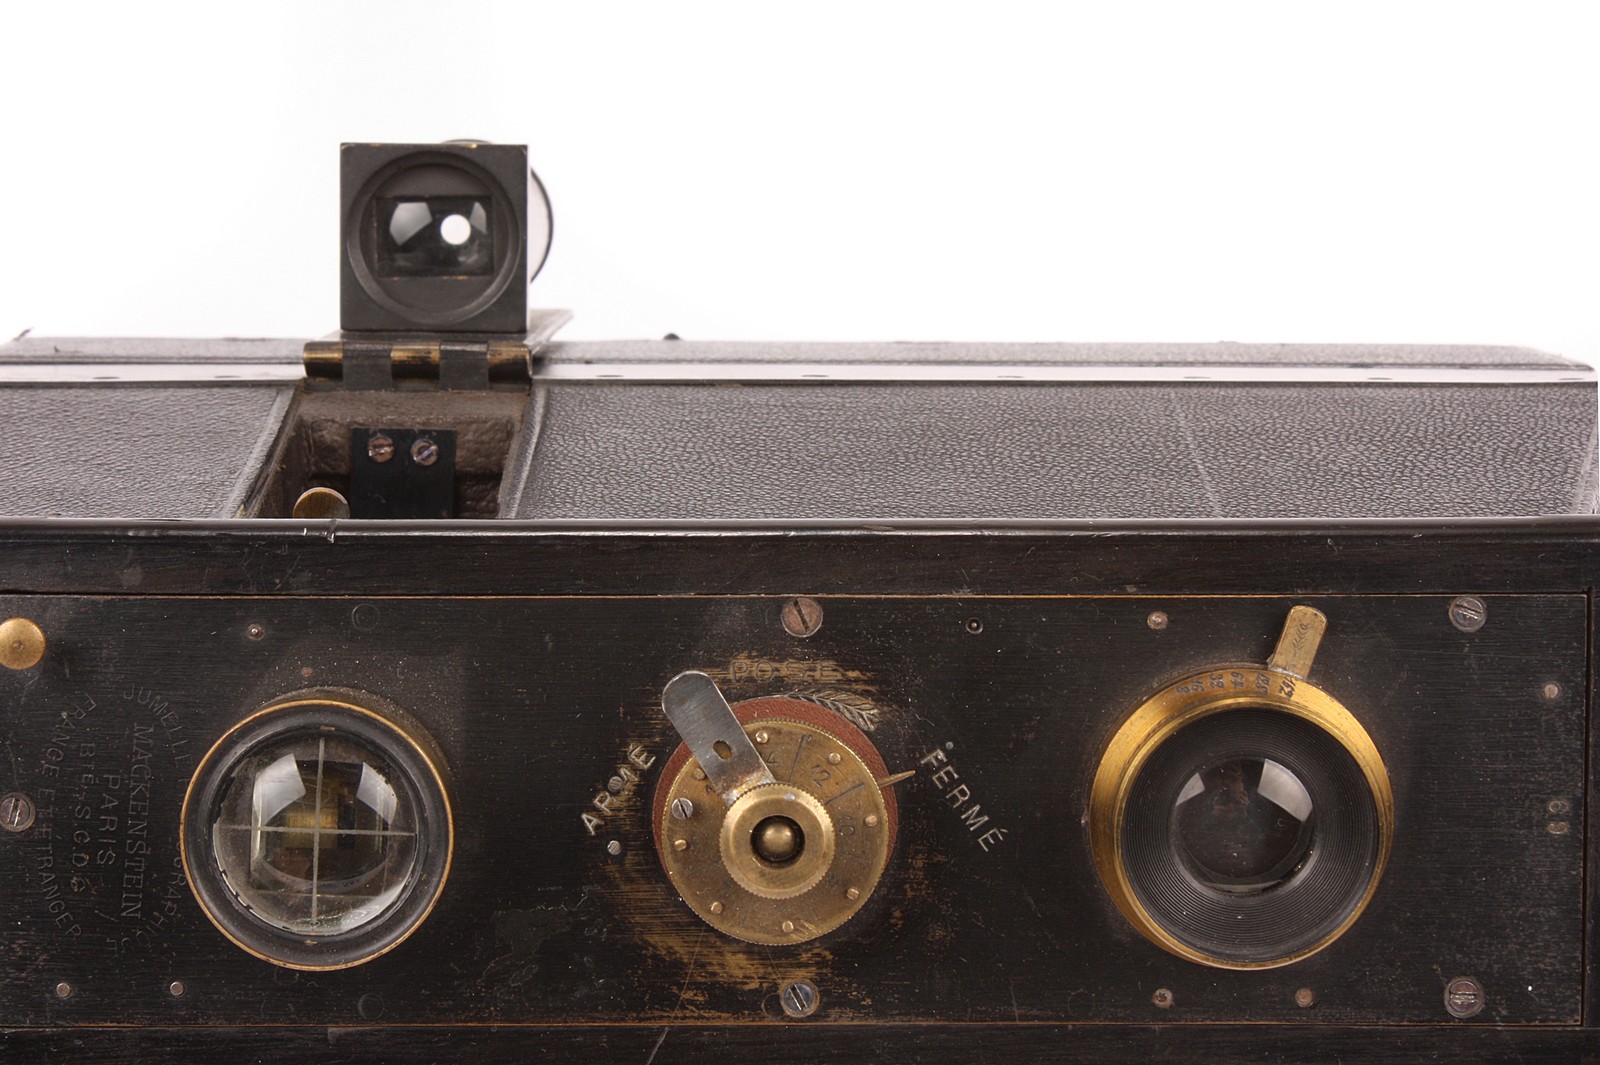 A Mackenstein Jumelle Photographique Camera, 2½x3½, with E. Krauss Anastigmat Zeiss f/8 110mm - Image 2 of 2